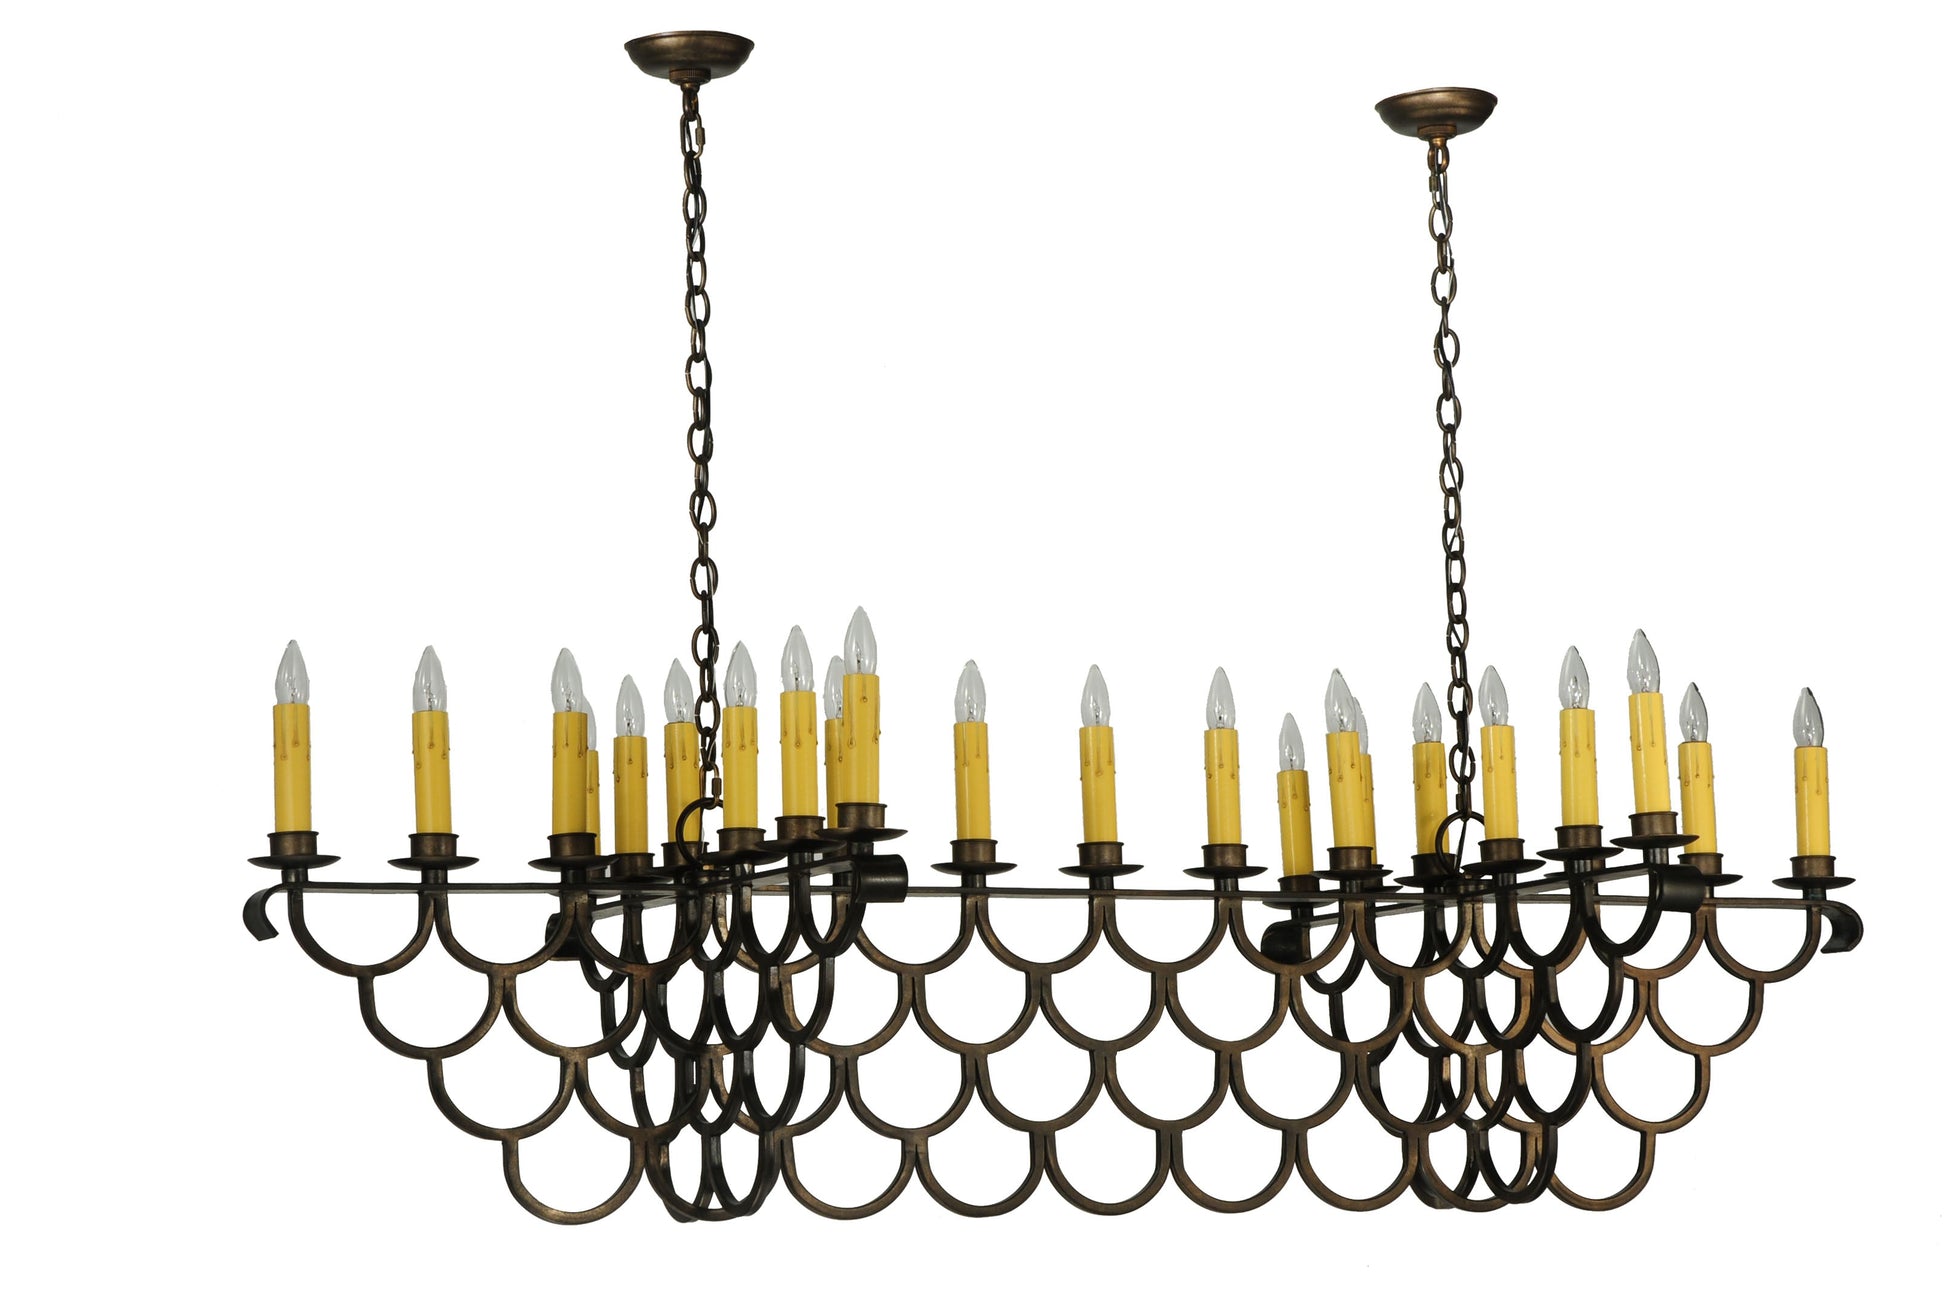 71" Picadilly 23-Light Oblong Chandelier by 2nd Ave Lighting